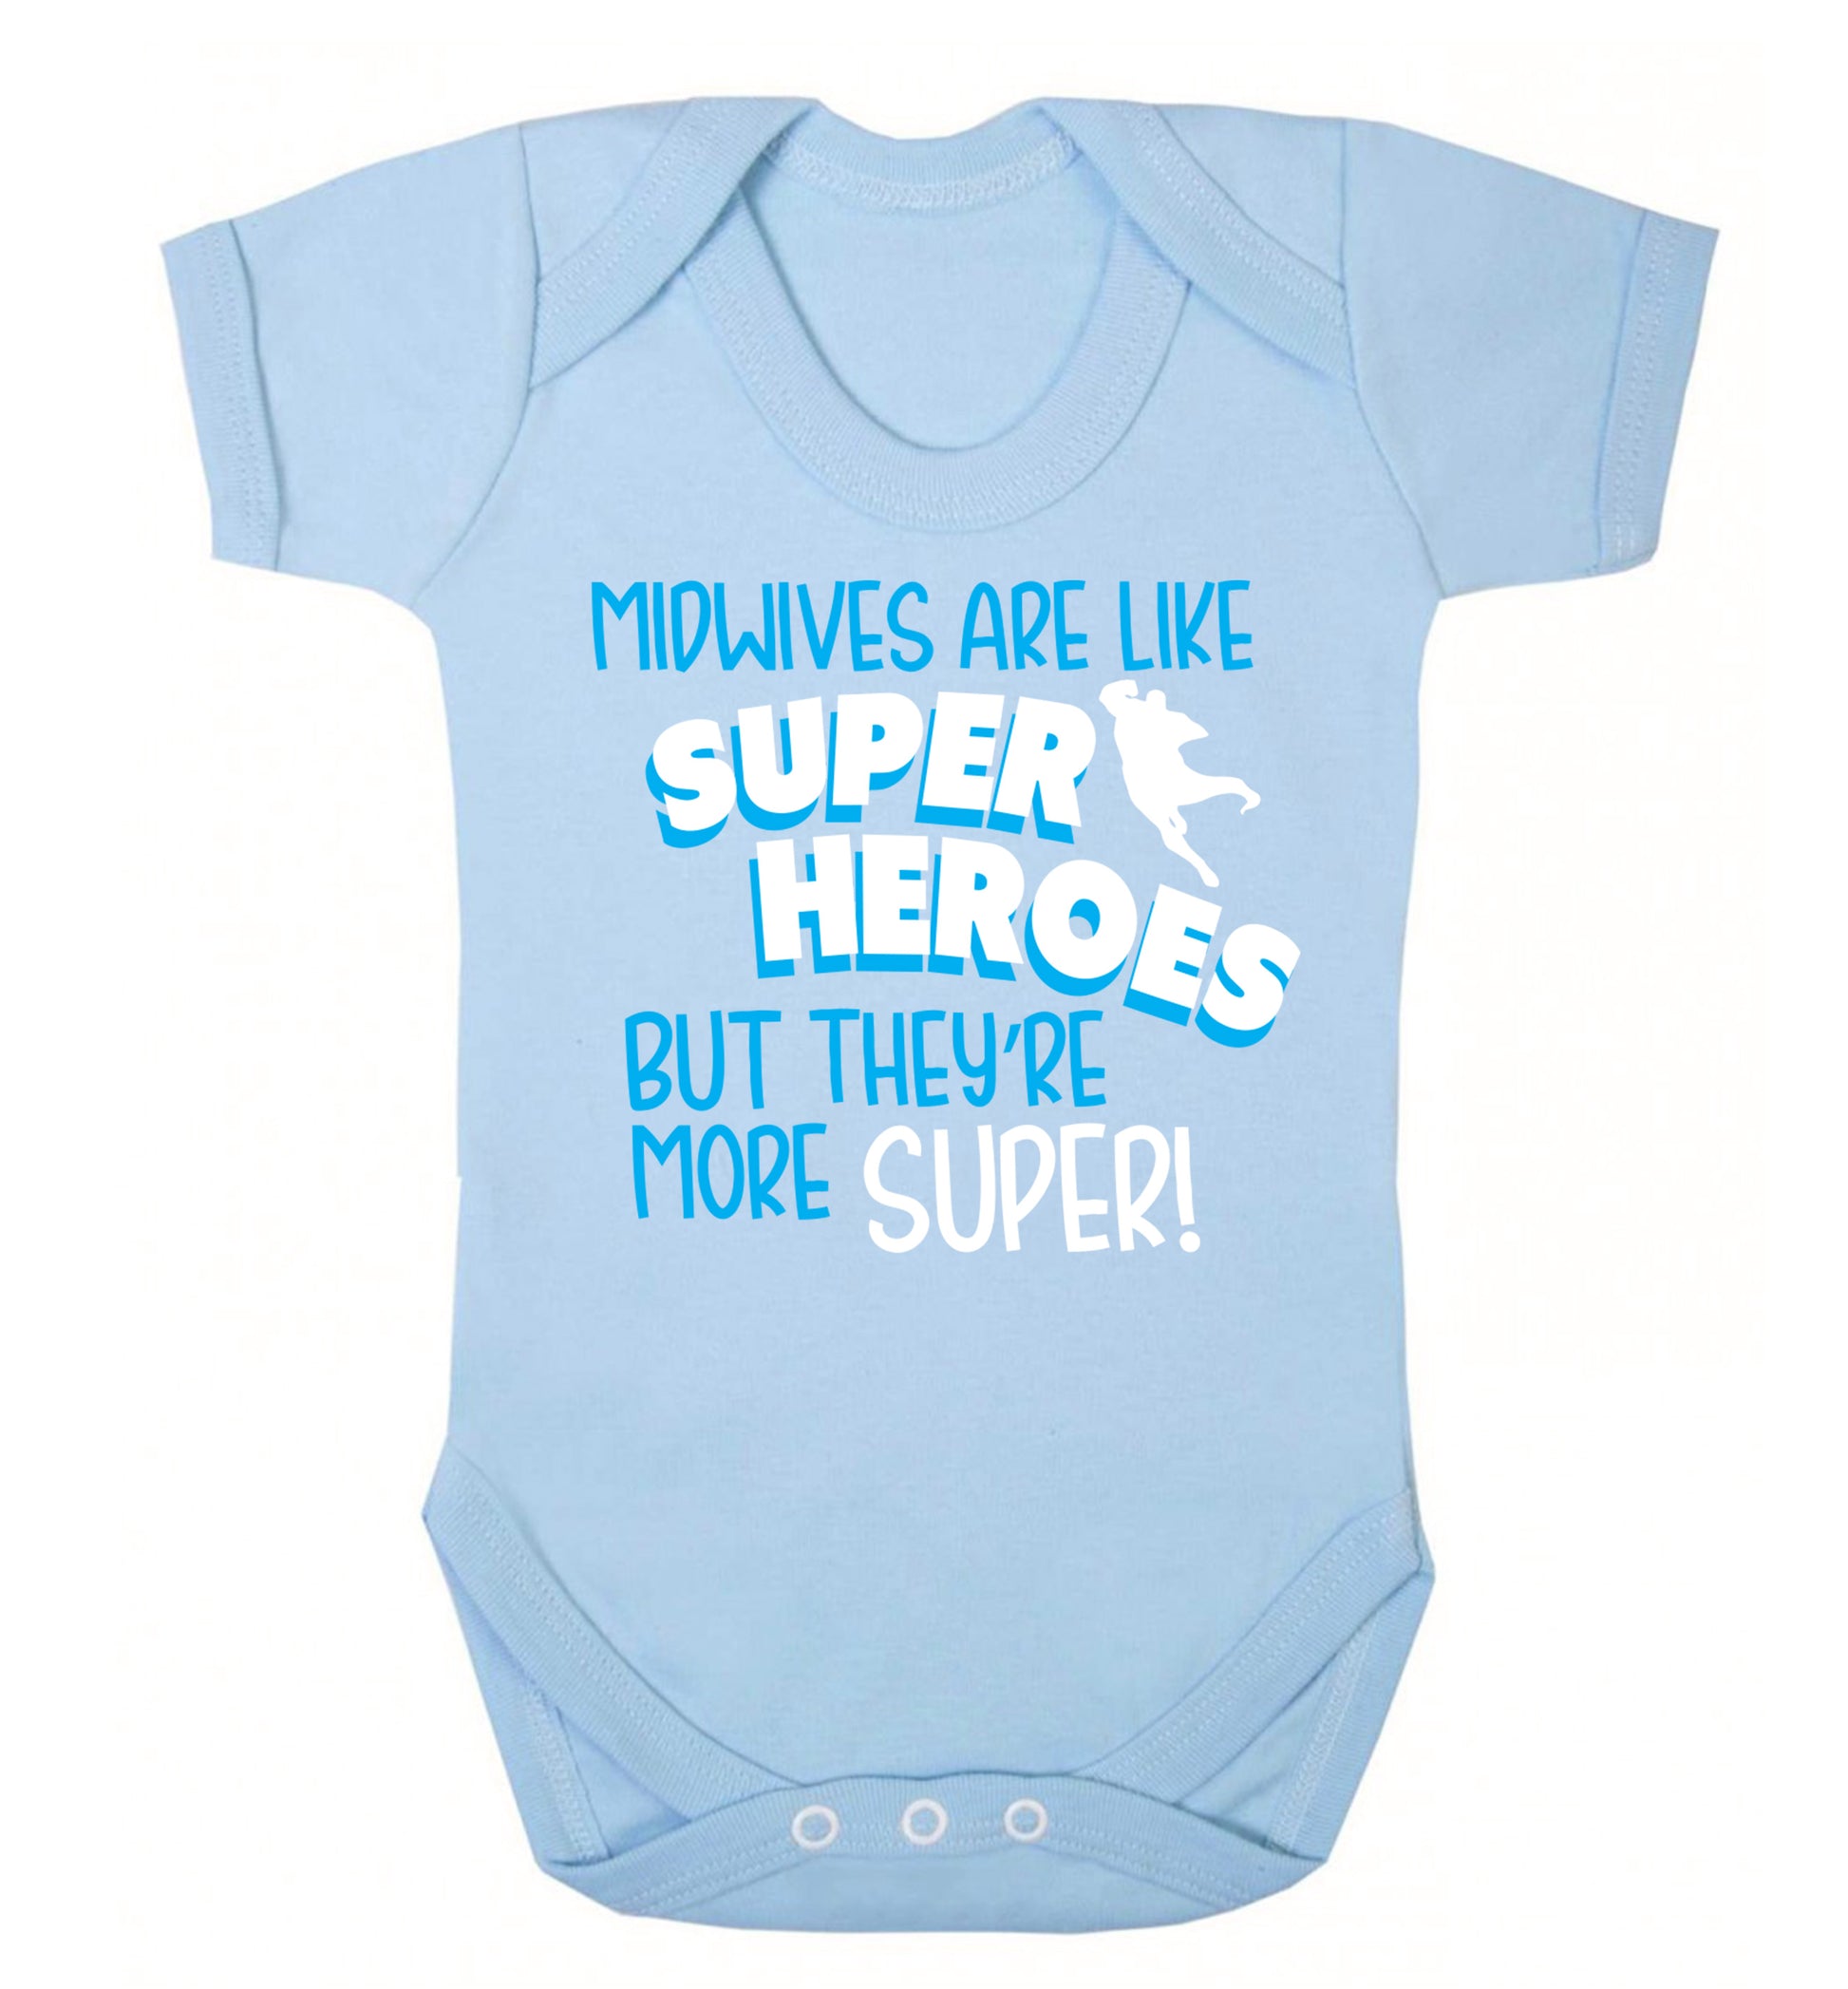 Midwives are like superheros but they're more super Baby Vest pale blue 18-24 months